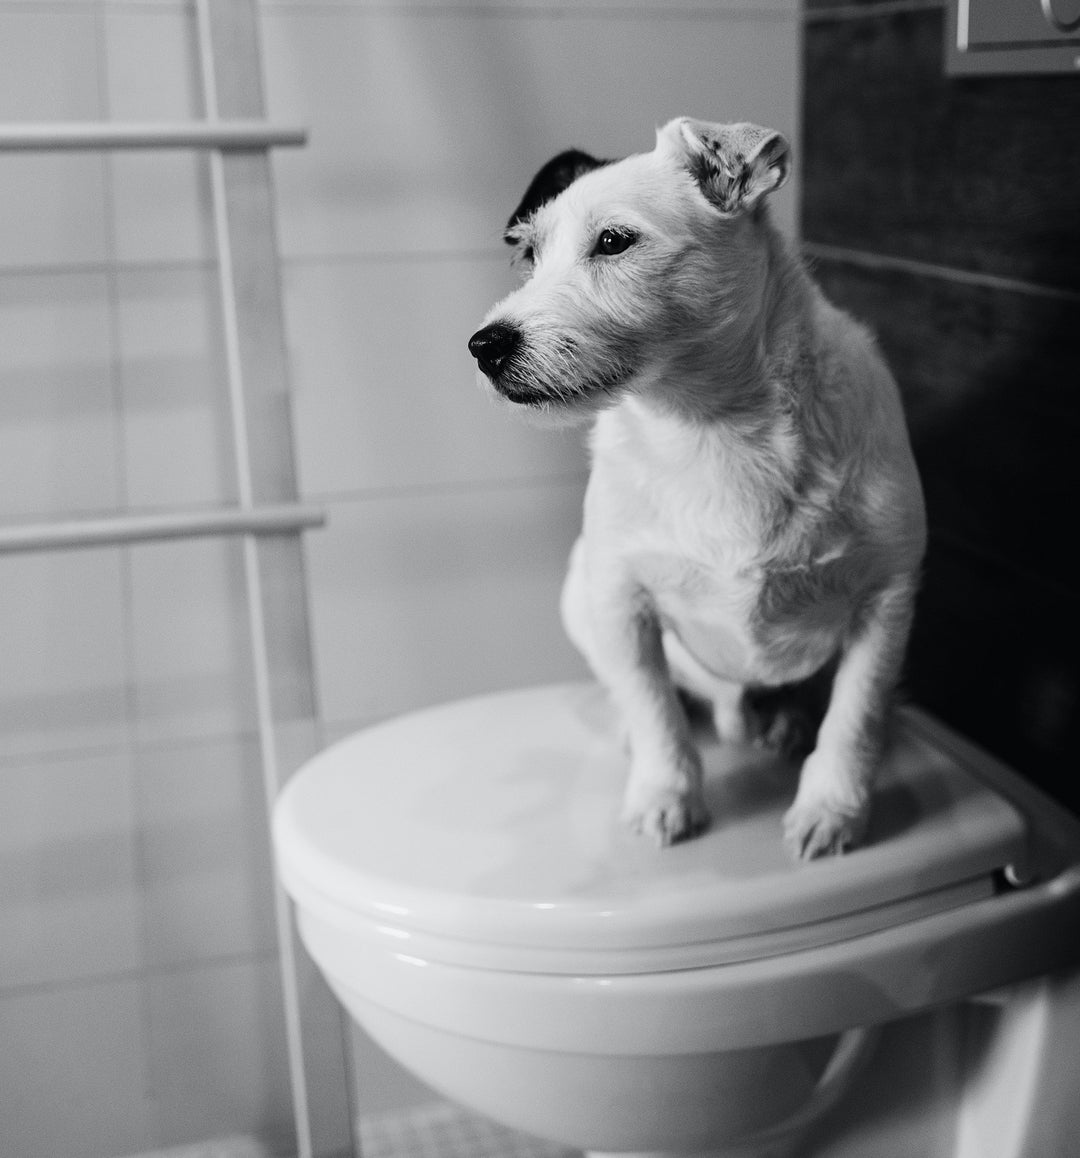 Can You Flush Your Dog Poop Problem Down the Toilet?